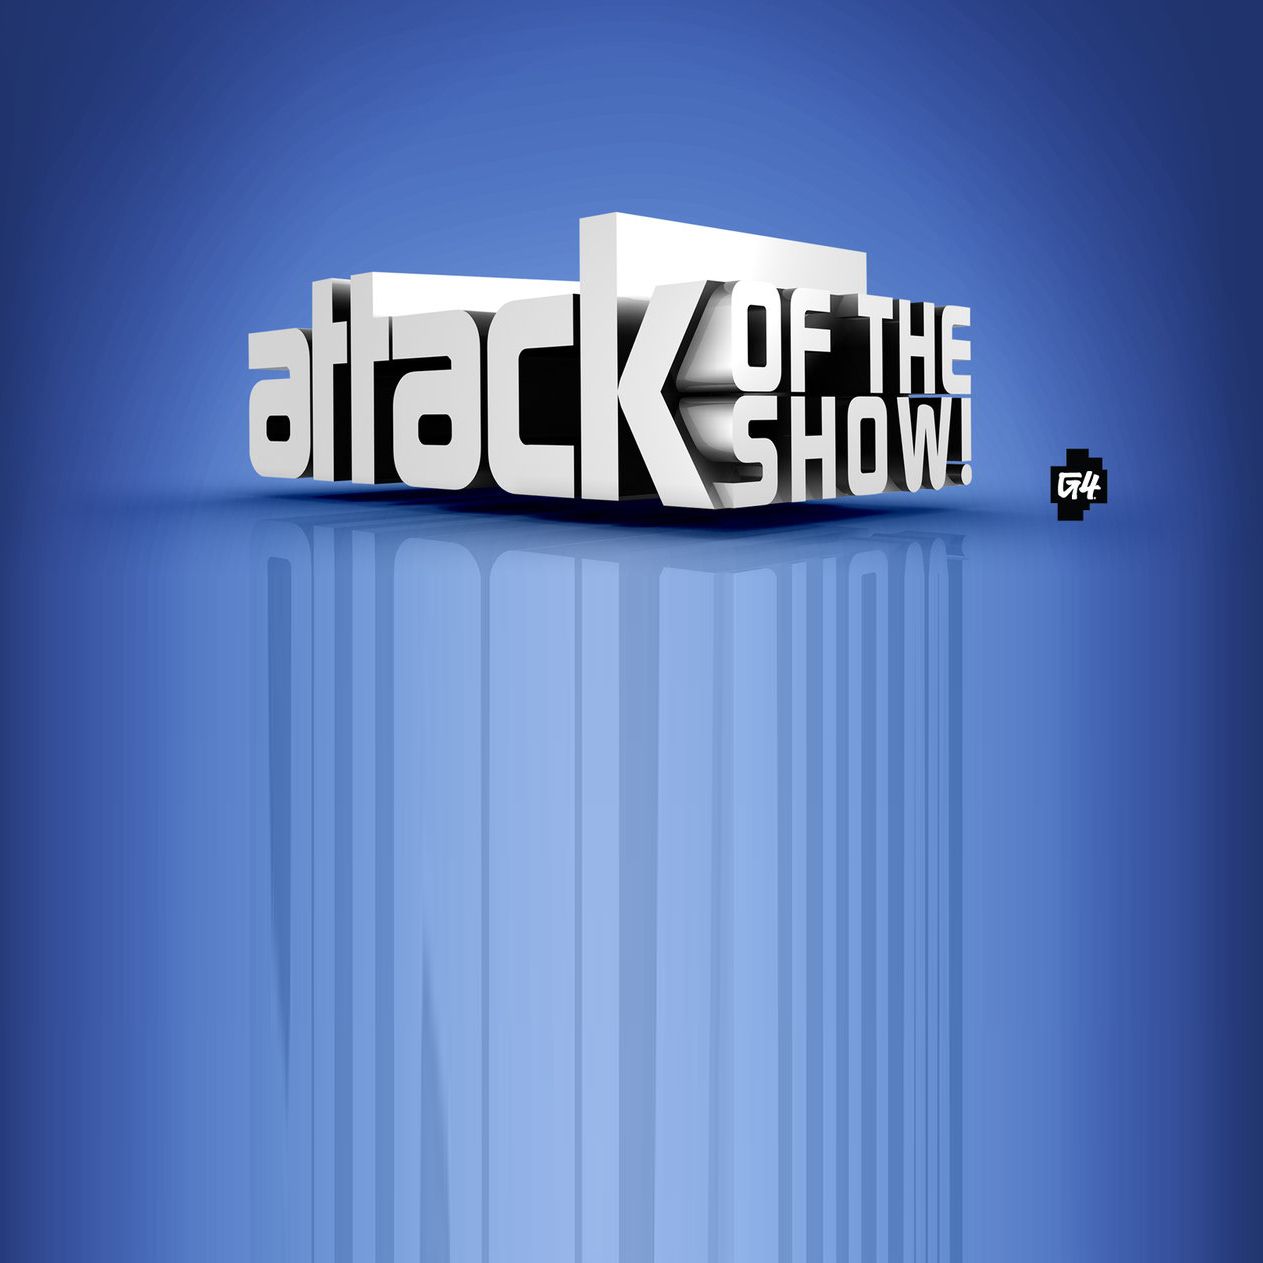 Attack of the Show